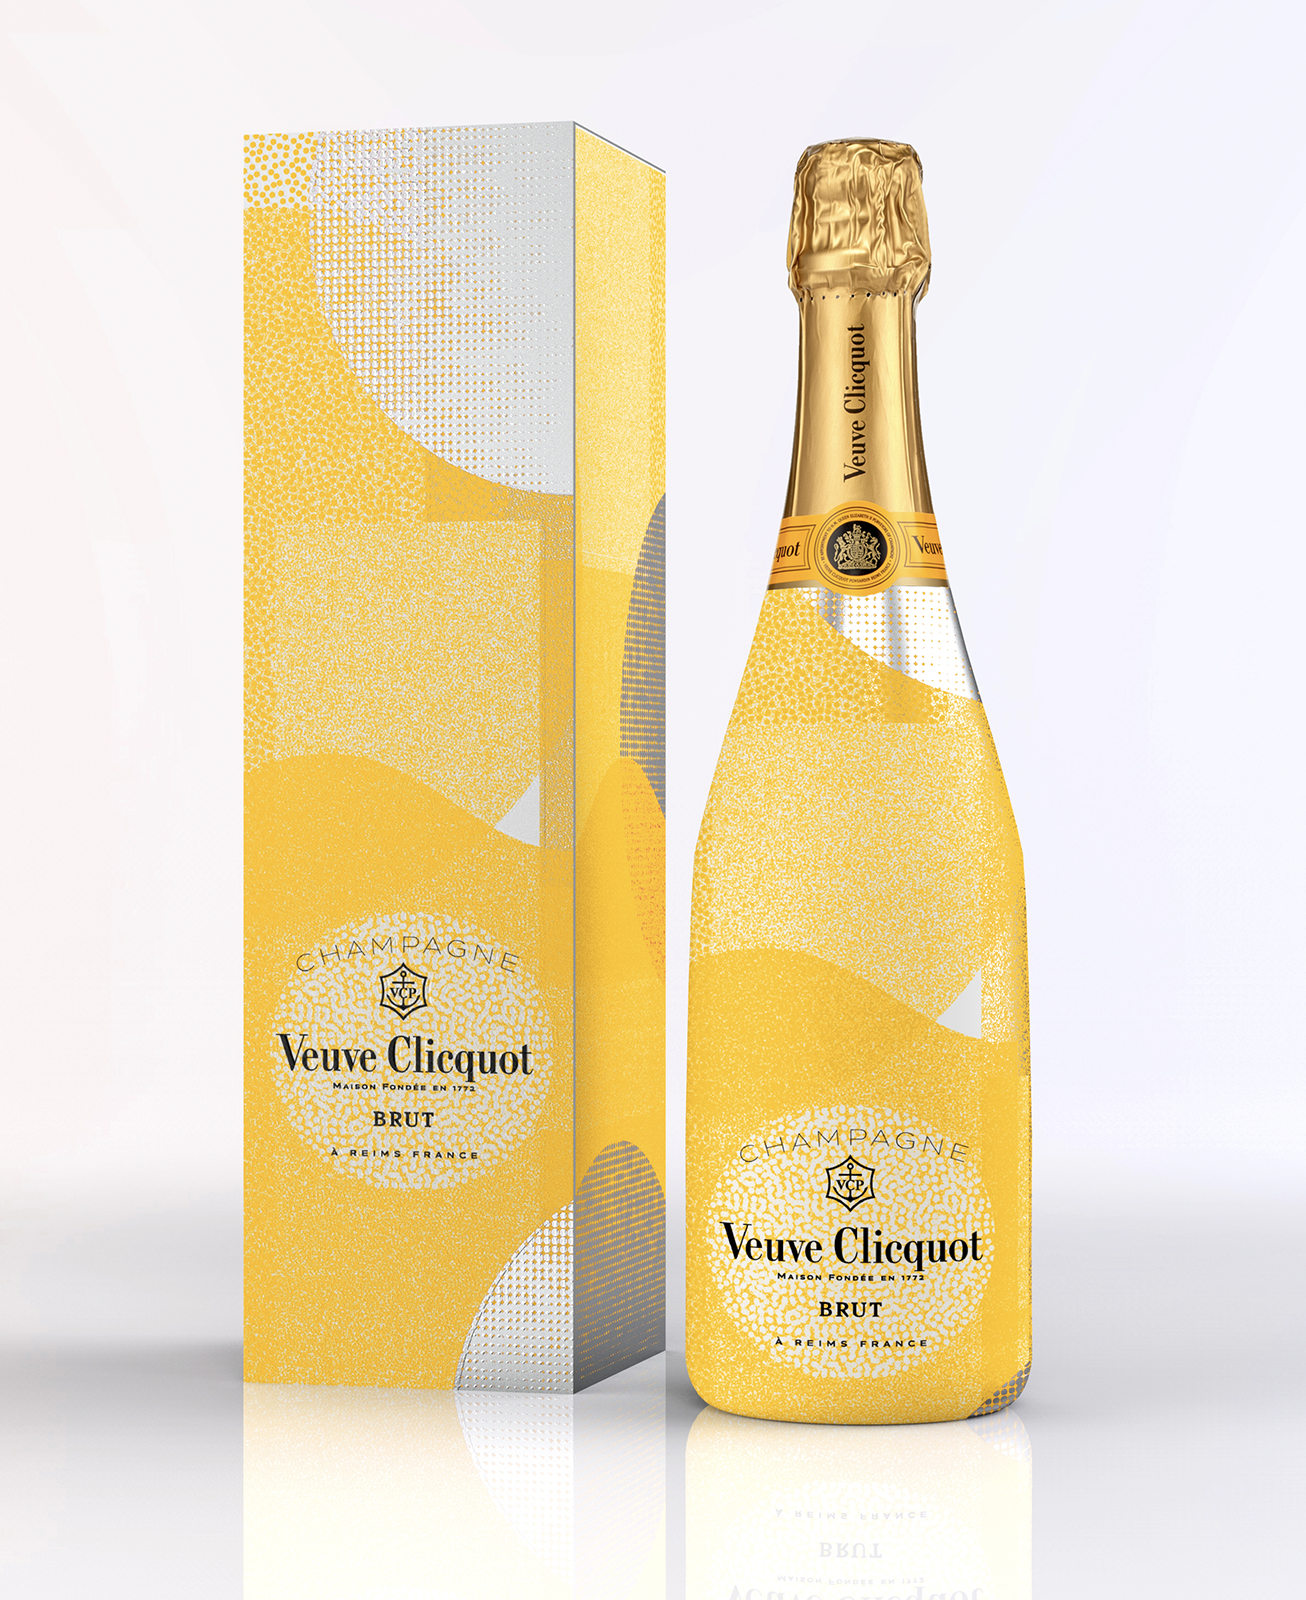 Veuve Clicquot Gets Fashionable New Image – WWD